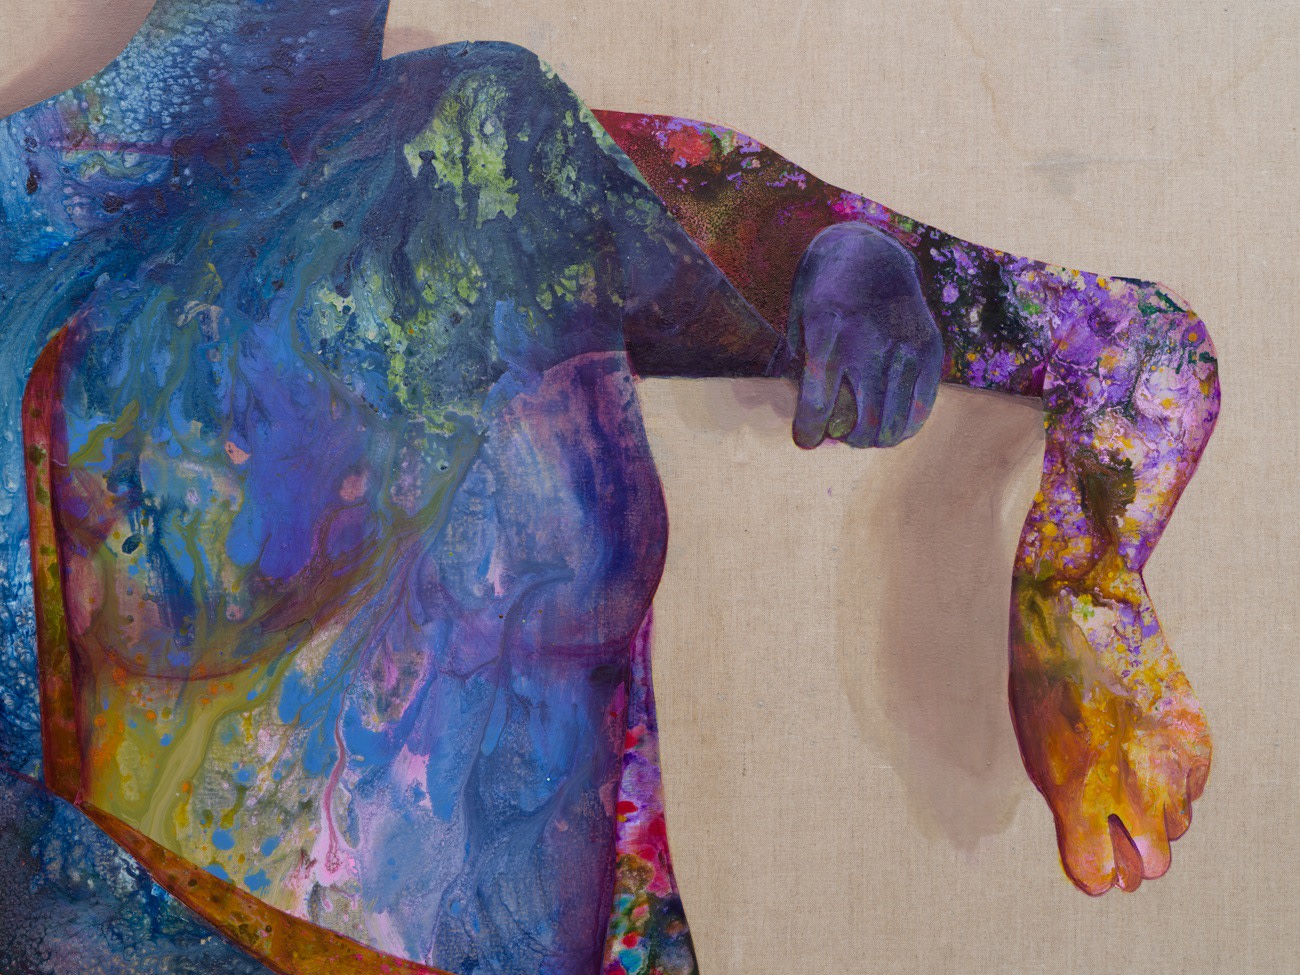 Detail of FIRELEI B&Aacute;EZ's In the manner of water and light, 2019